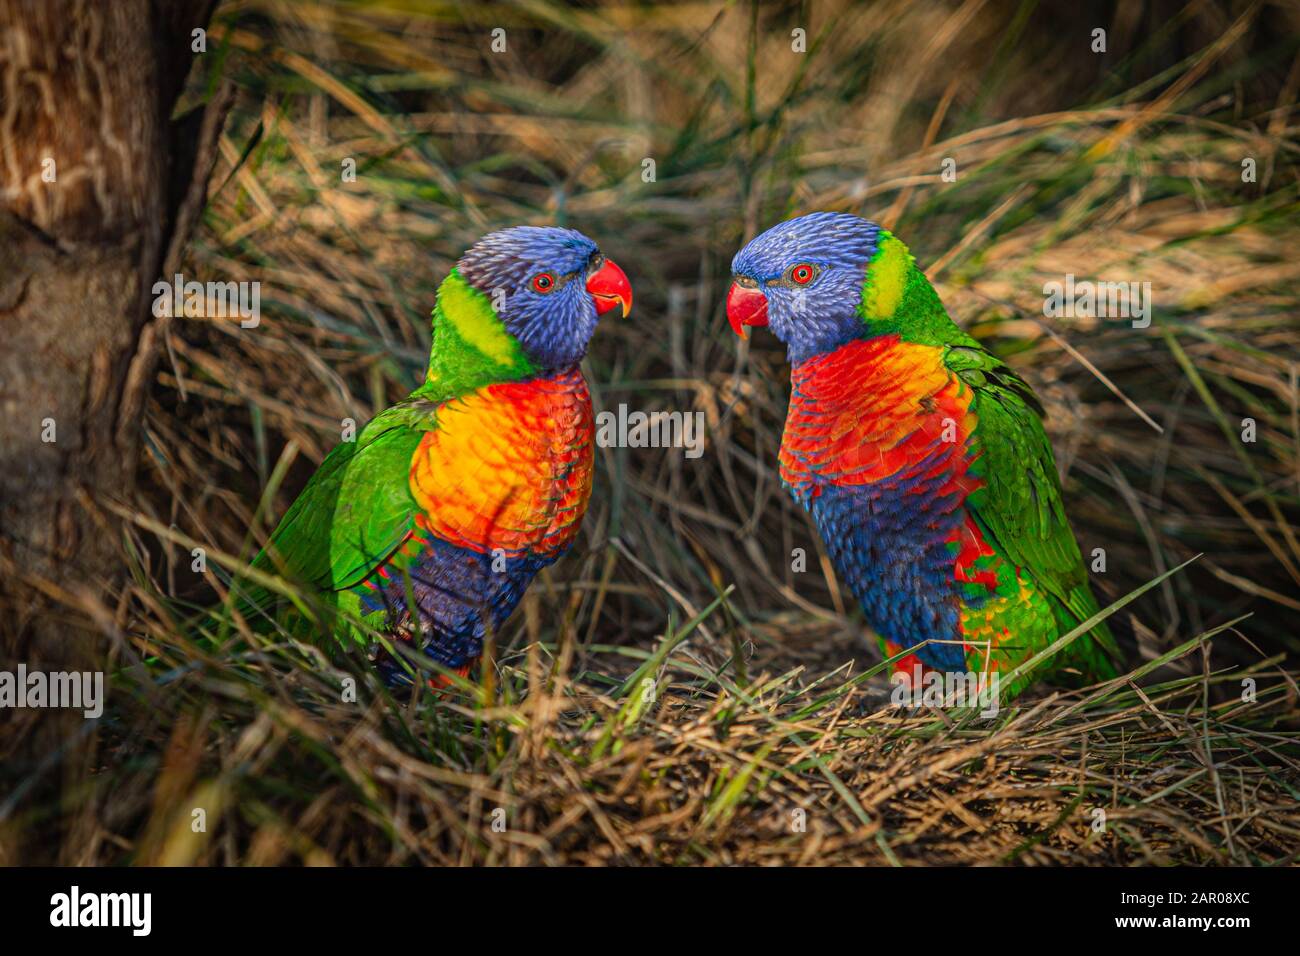 A pair of colorful rainbow lorikeets, a blue, orange, green and yellow parrots with red eyes and beak, sitting on dry brown grass on a sunny day. Stock Photo